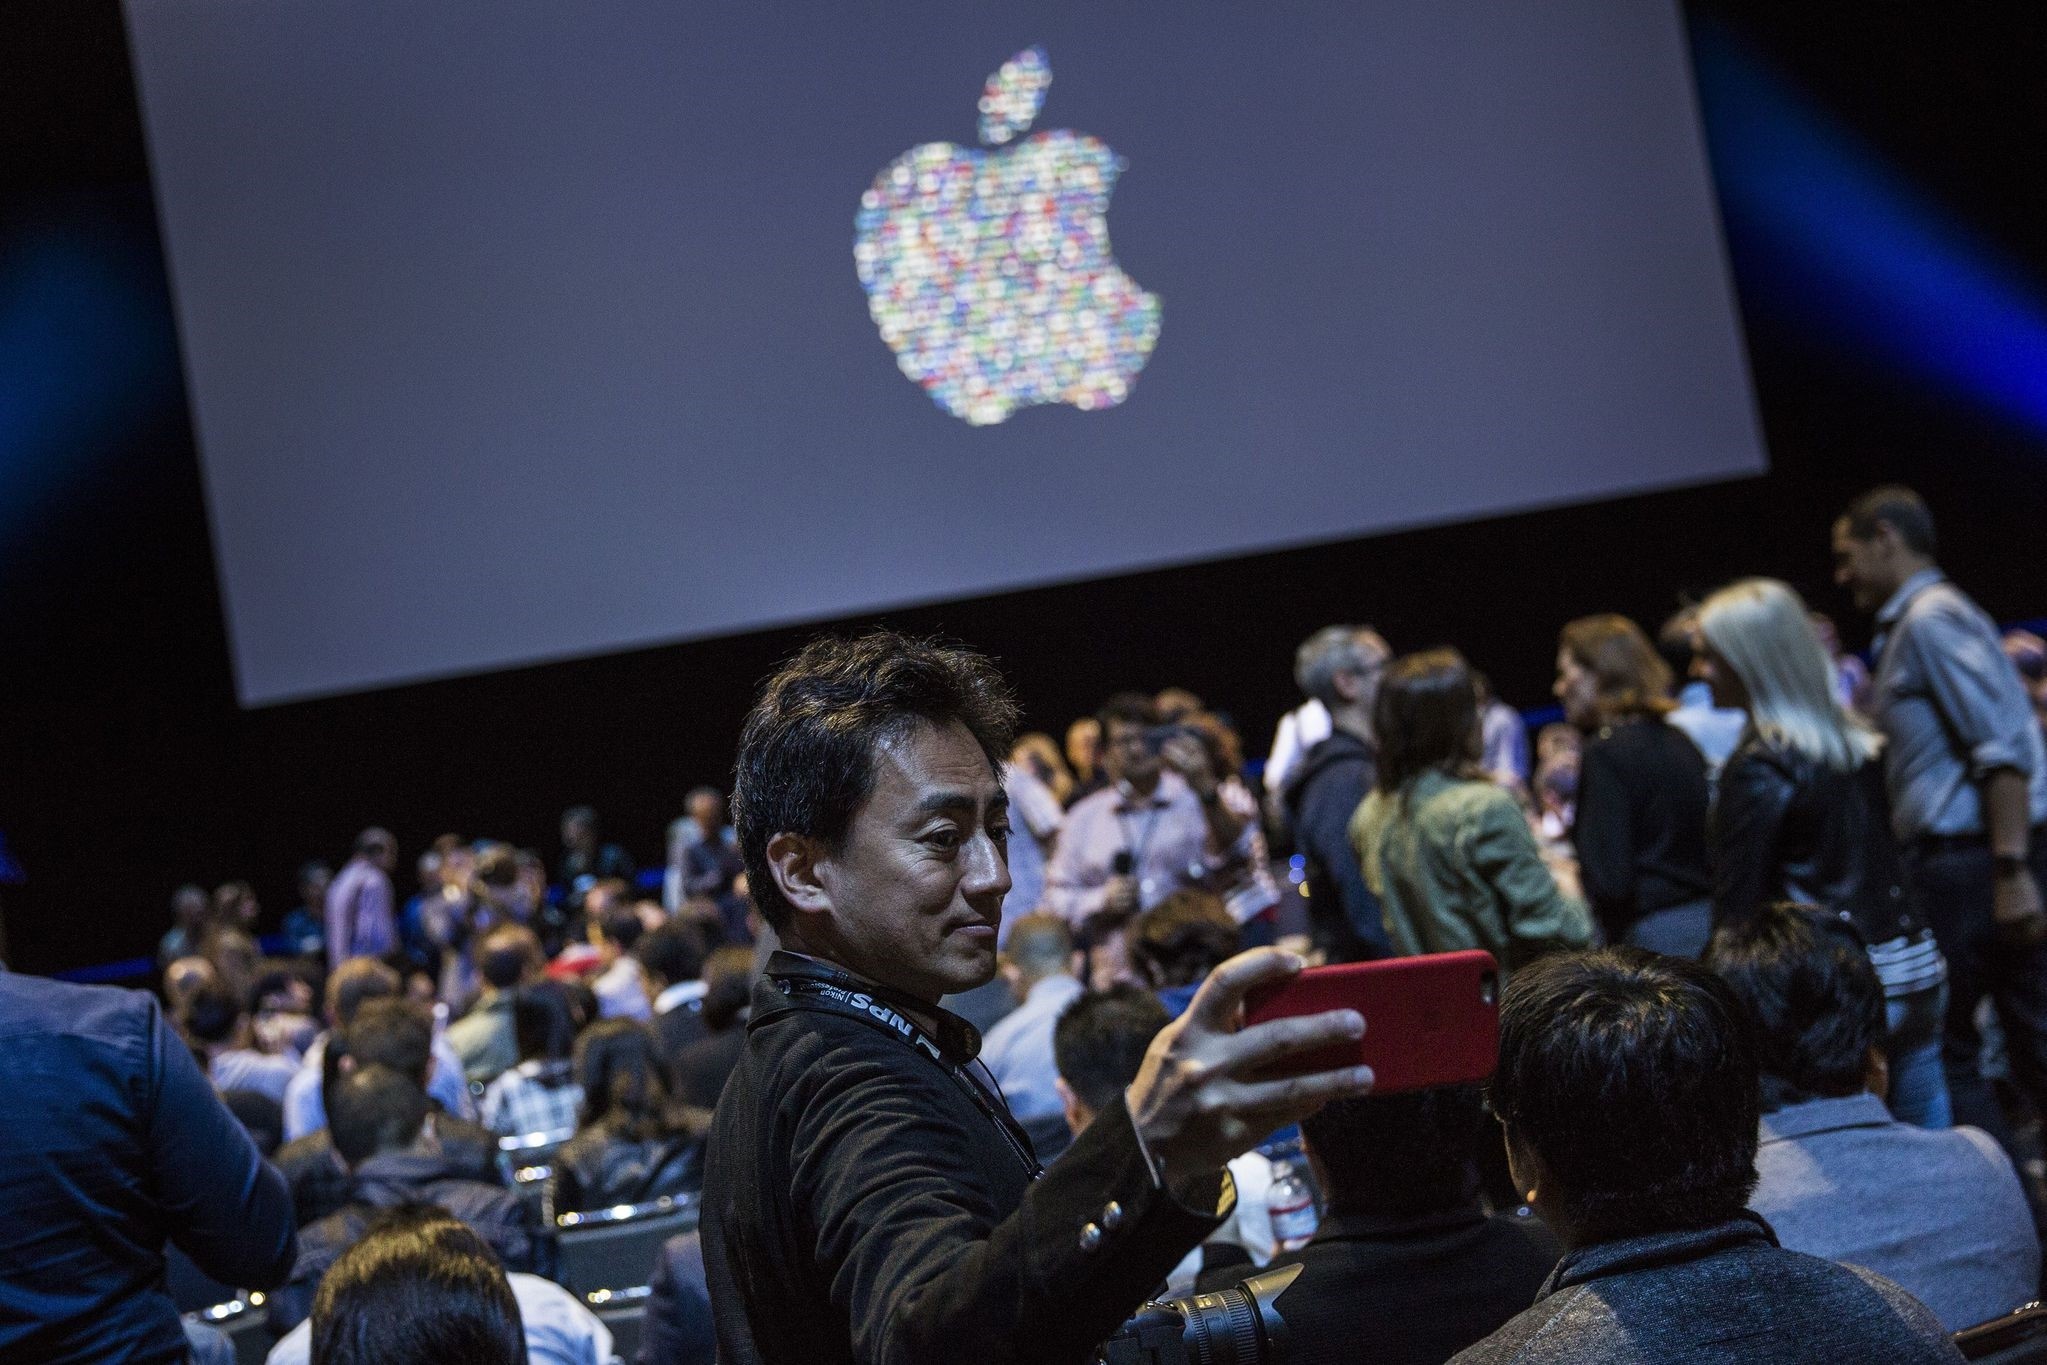  A man takes a selfie while waiting for the start of an Apple event at the Worldwide Developer's Conference on June 13, 2016 in San Francisco, California. (AFP Photo)